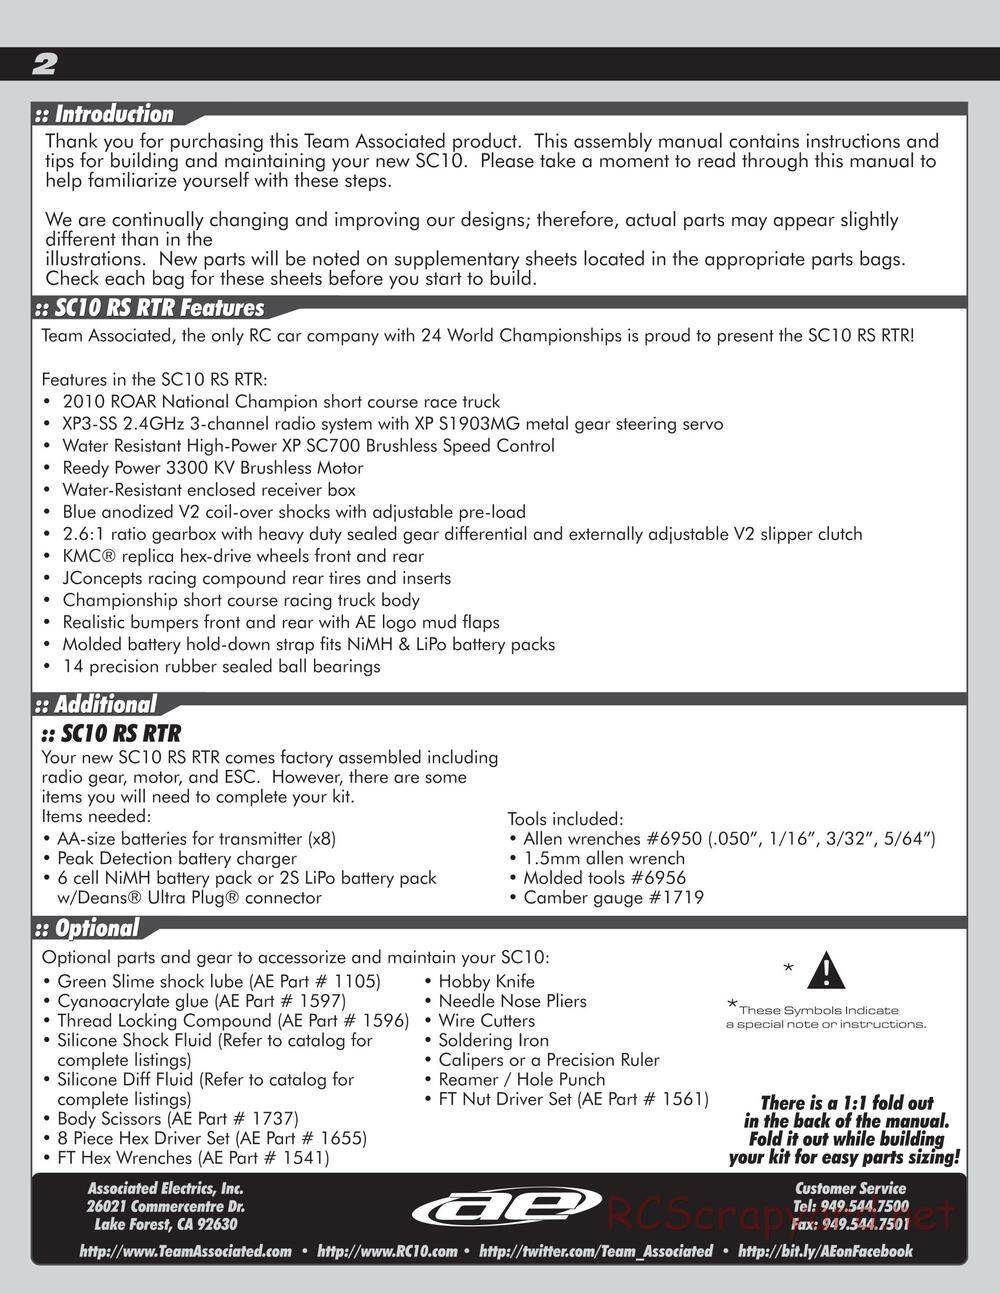 Team Associated - SC10 RS RTR - Manual - Page 2